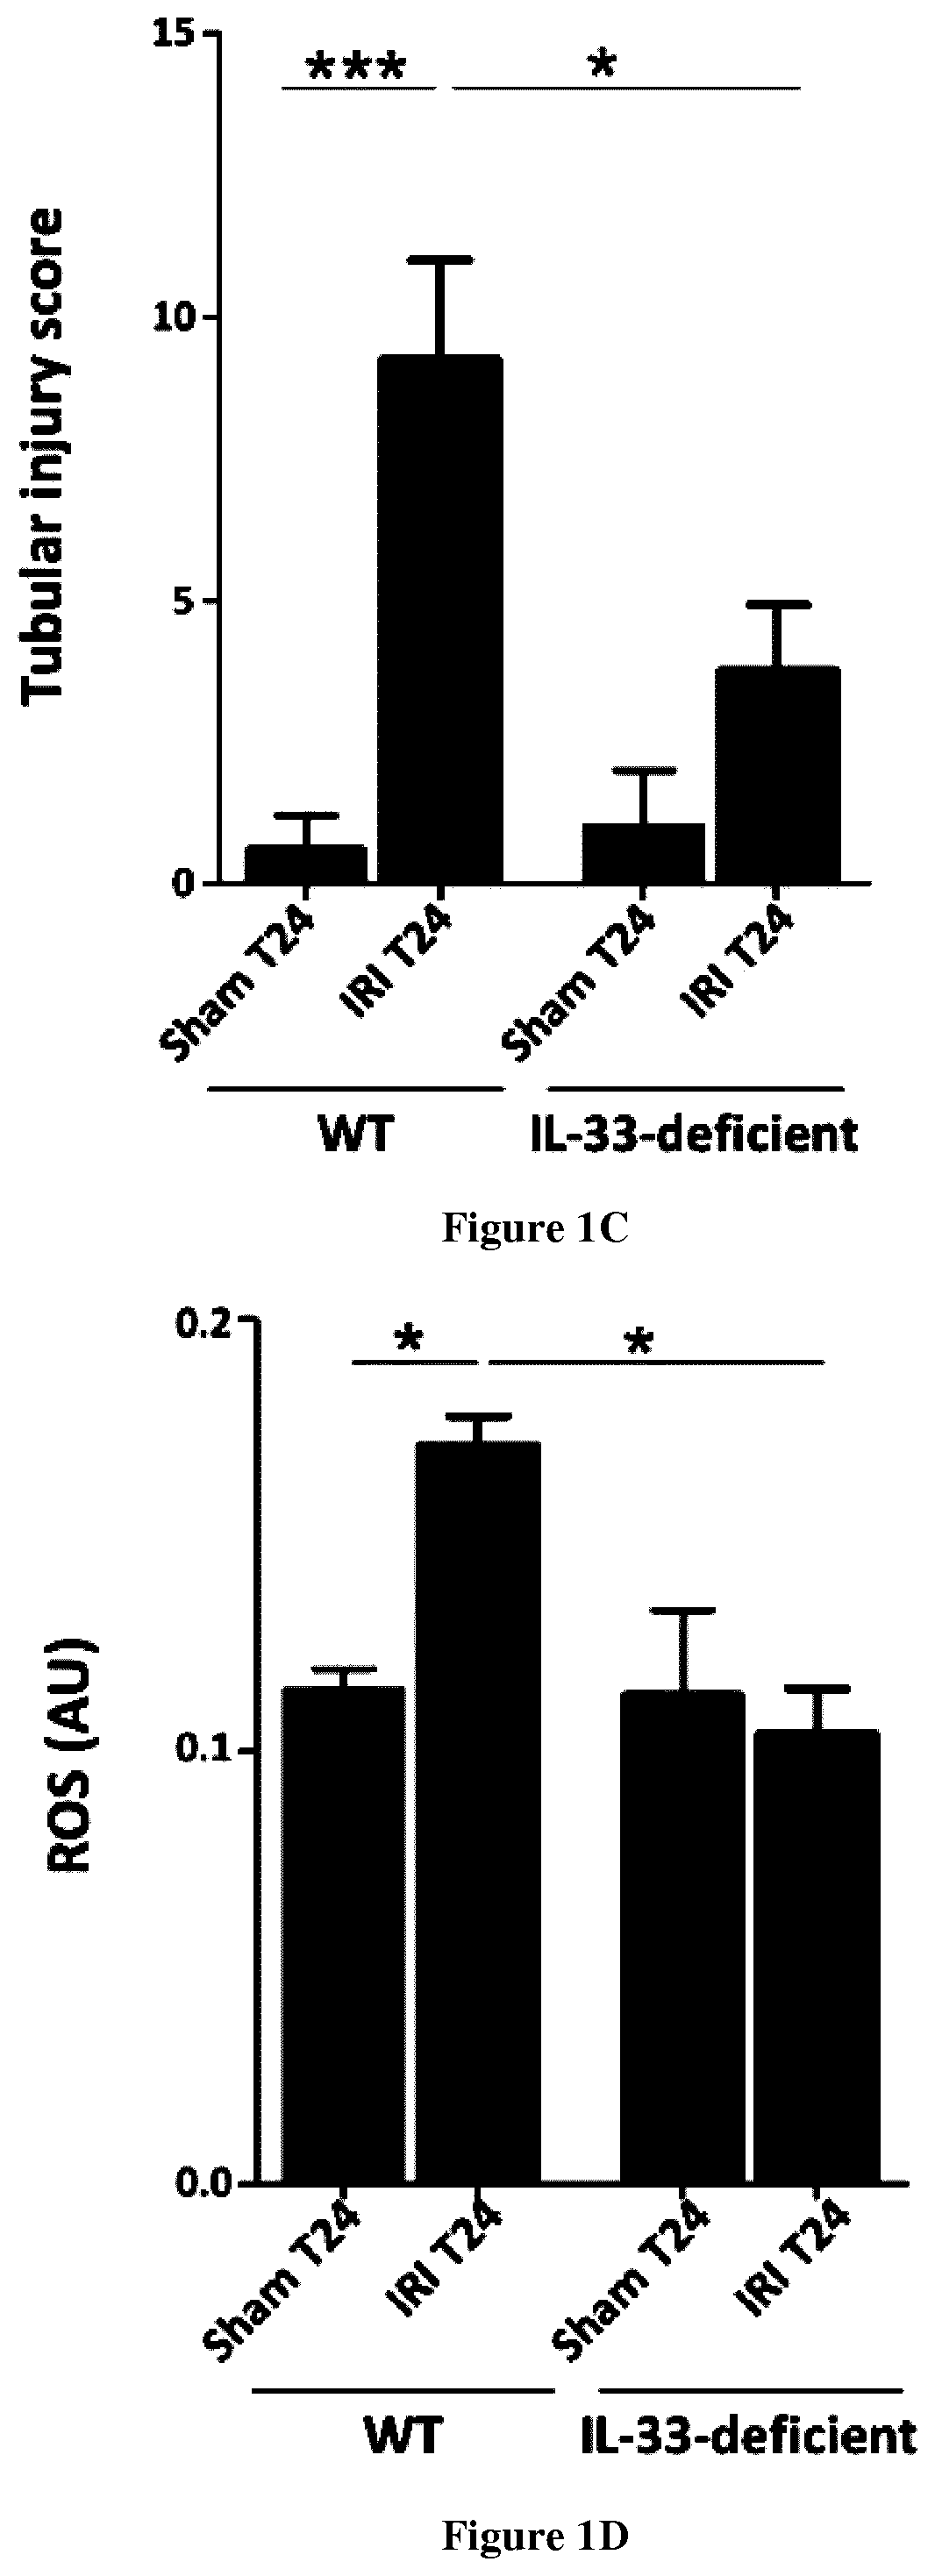 Antagonists of il-33 for use in methods for preventing ischemia reperfusion injusry in an organ